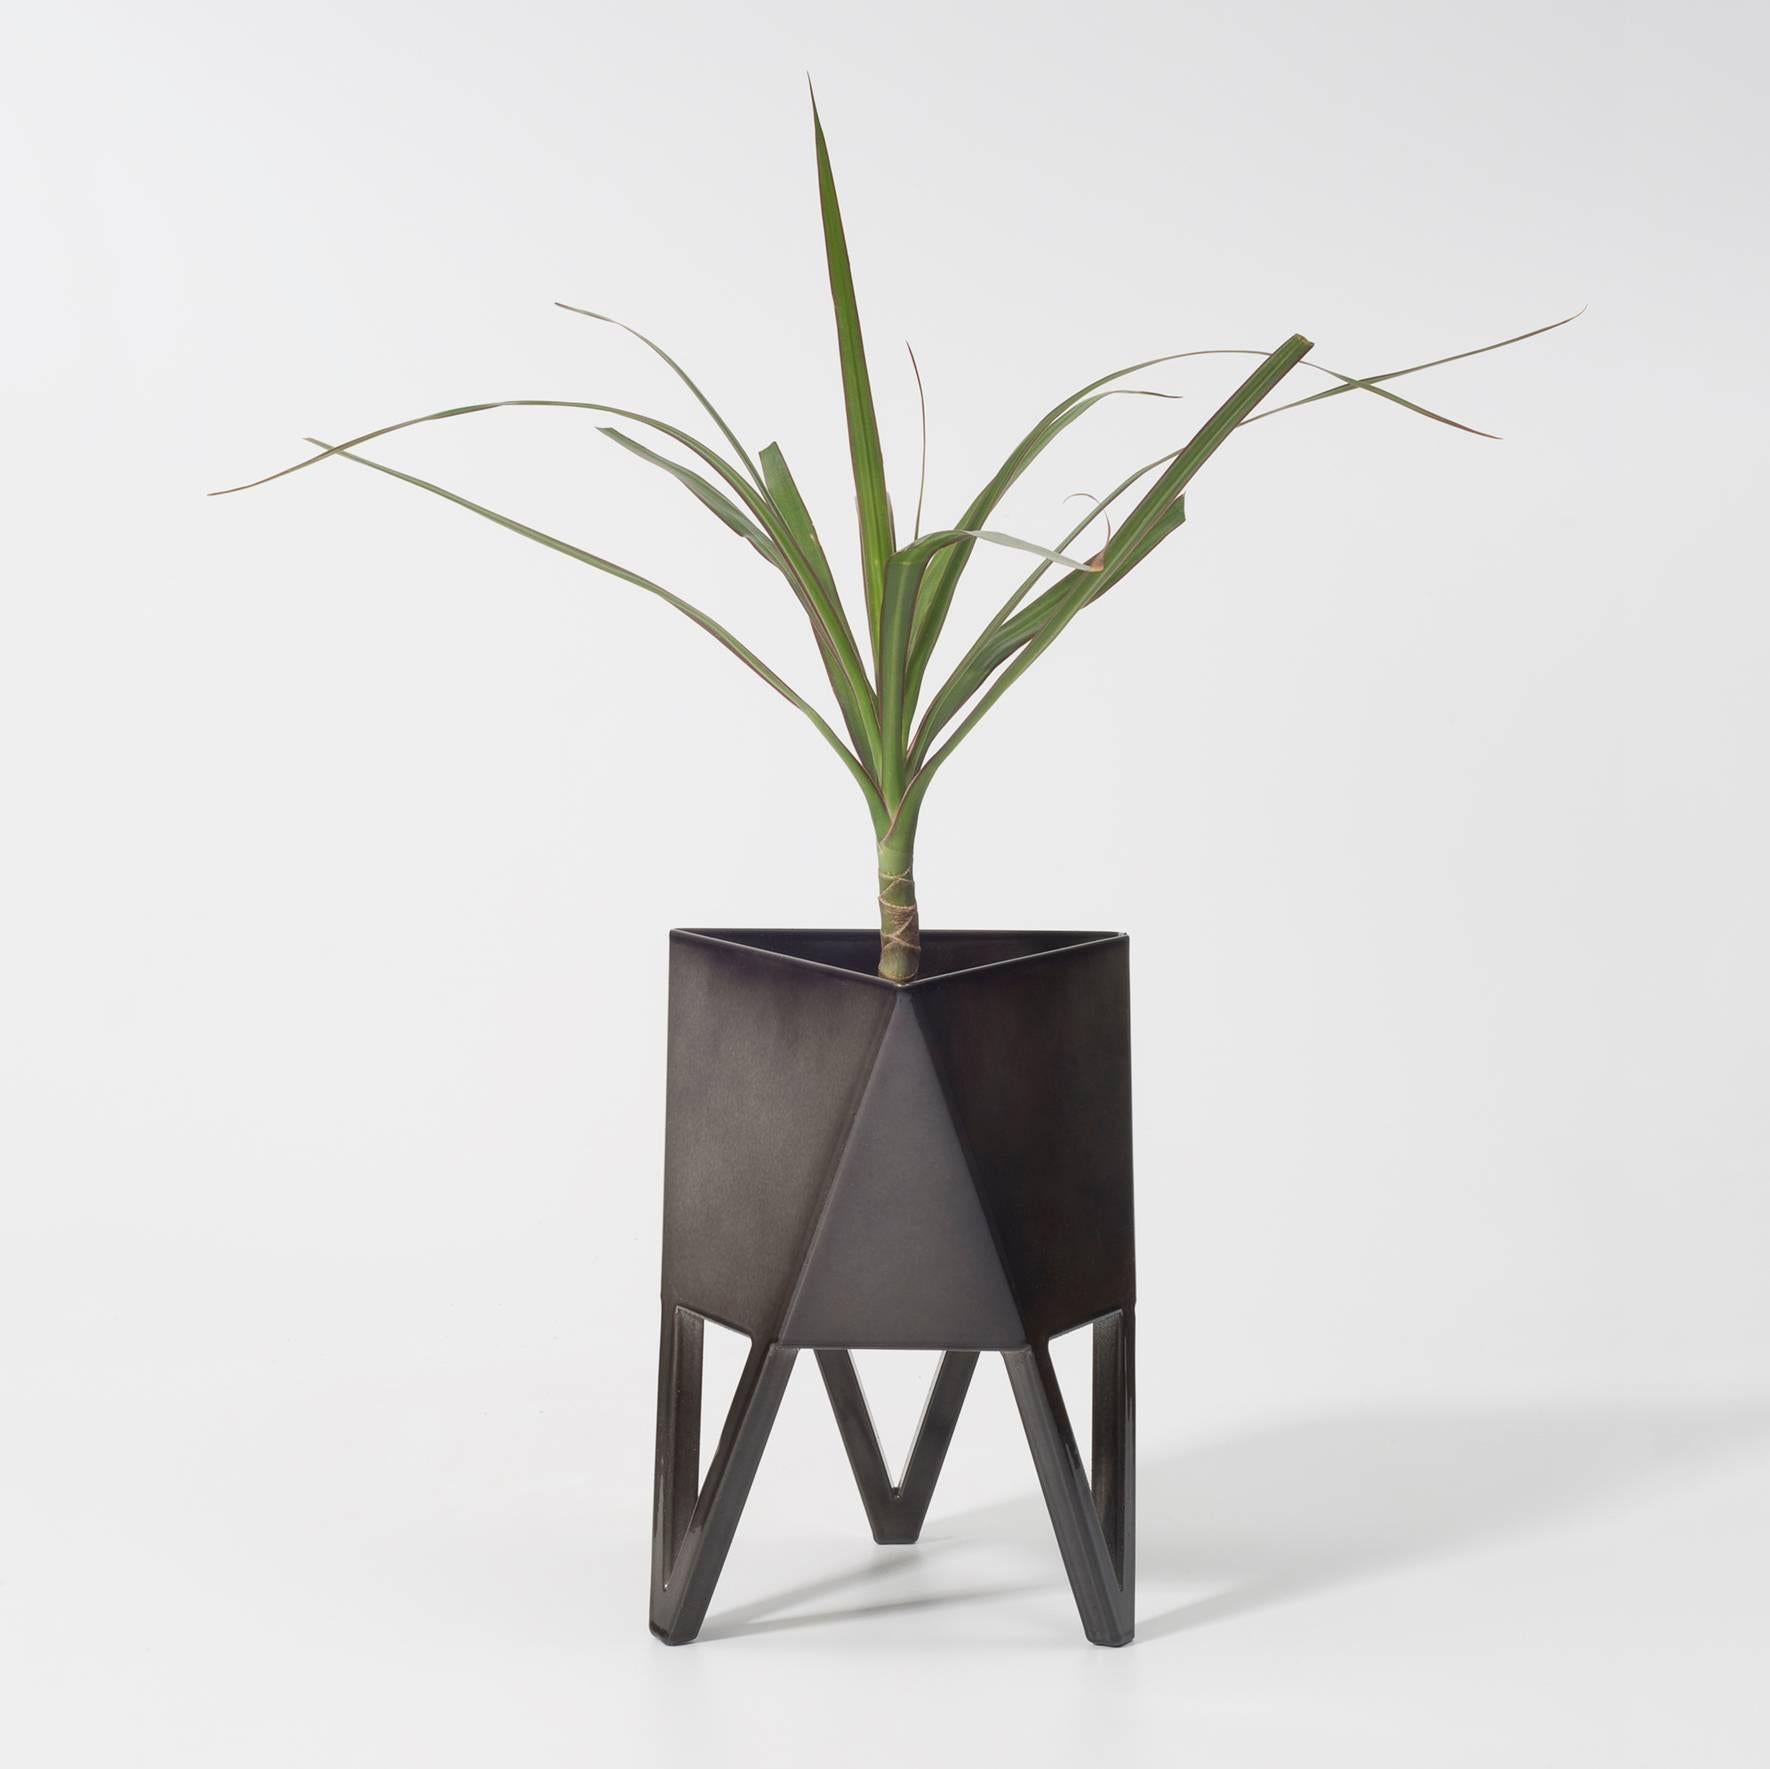 Deca Planter in Daffodil Yellow Steel, Large, by Force/Collide 3